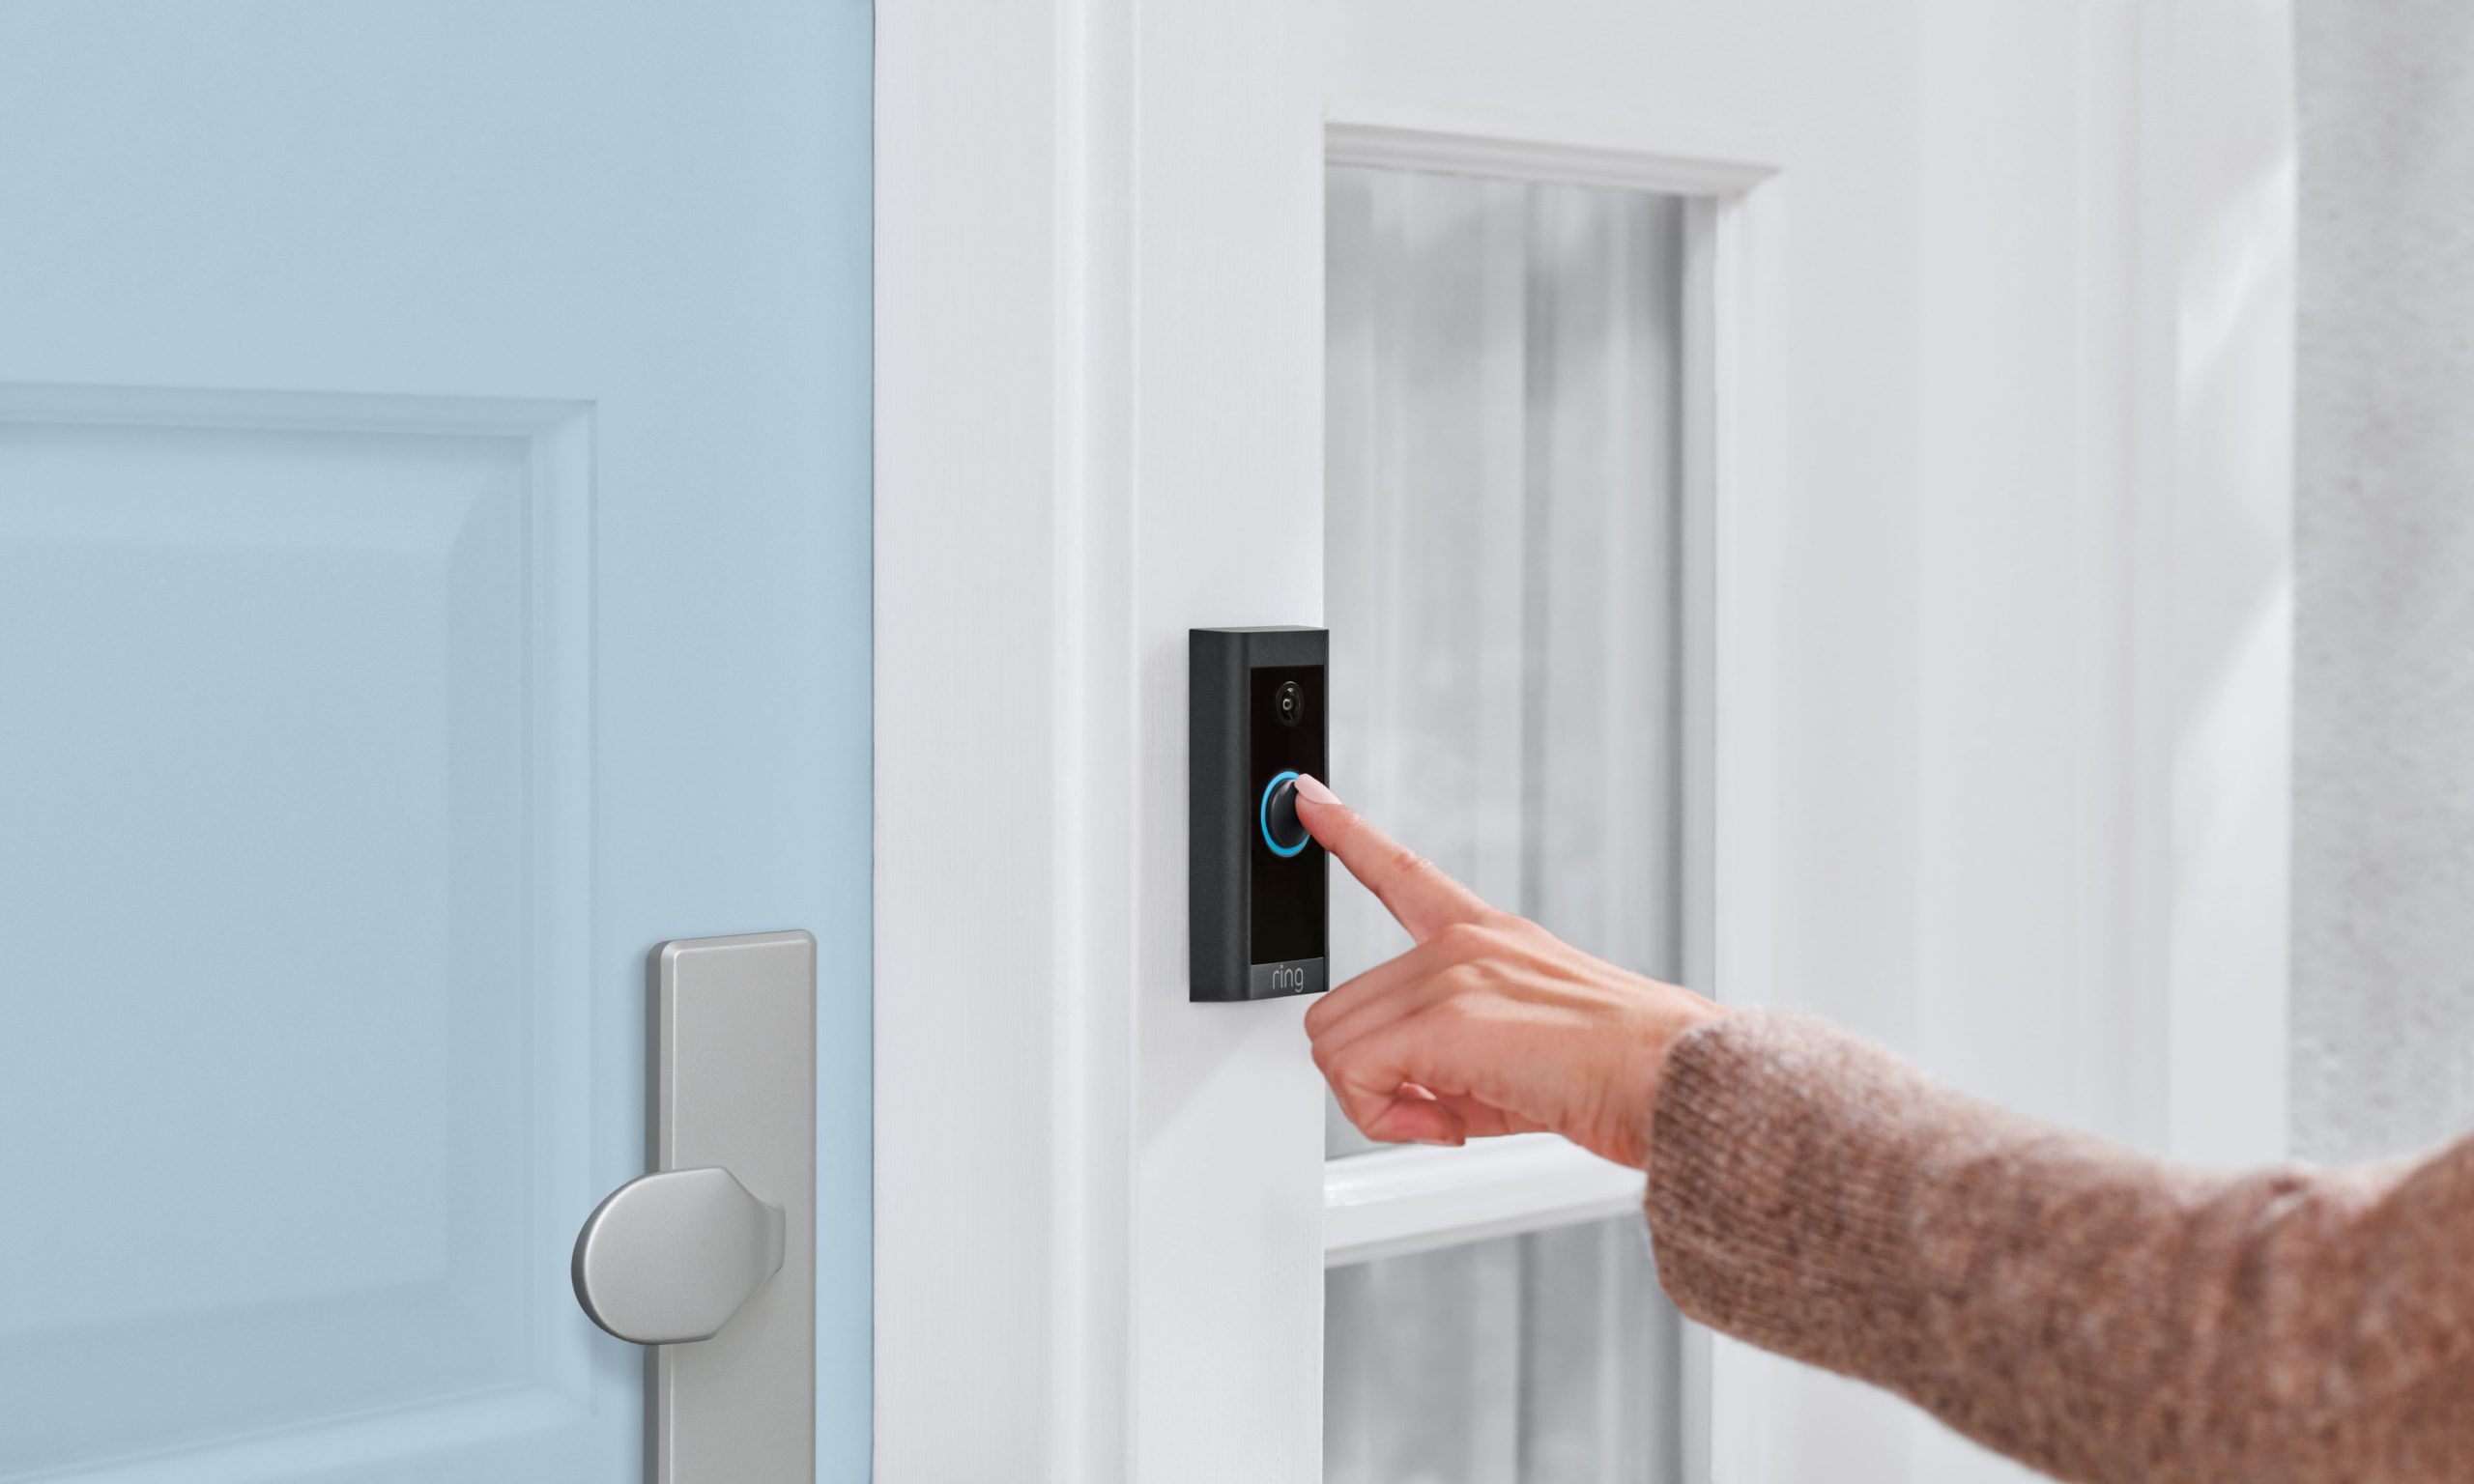 Development in Data protection law: Is your Neighbour’s doorbell and camera compliant?